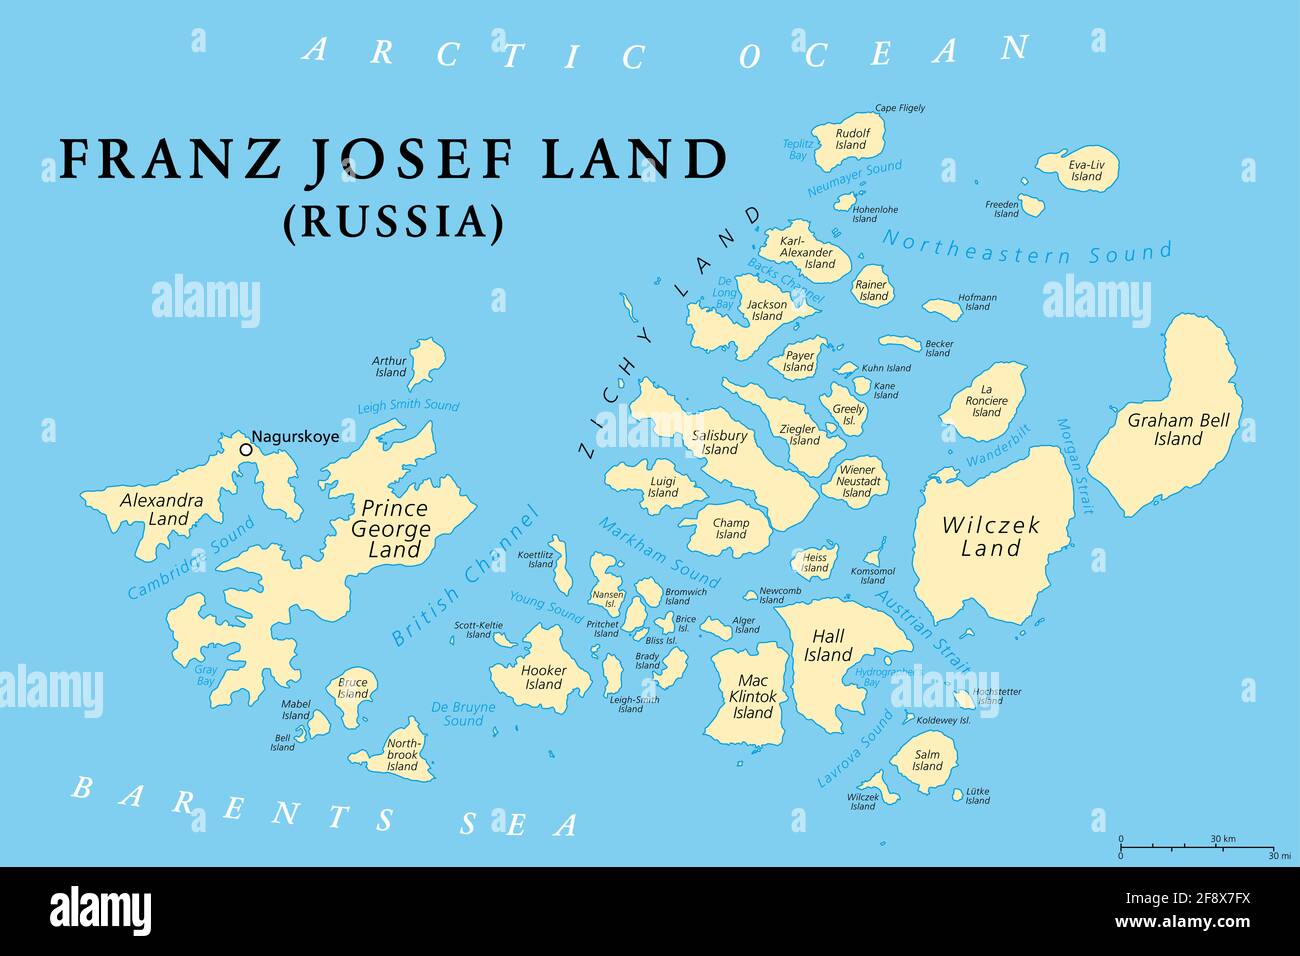 Franz Josef Land, political map. Russian archipelago in the Arctic Ocean, northernmost part of Arkhangelsk Oblast. Stock Photo